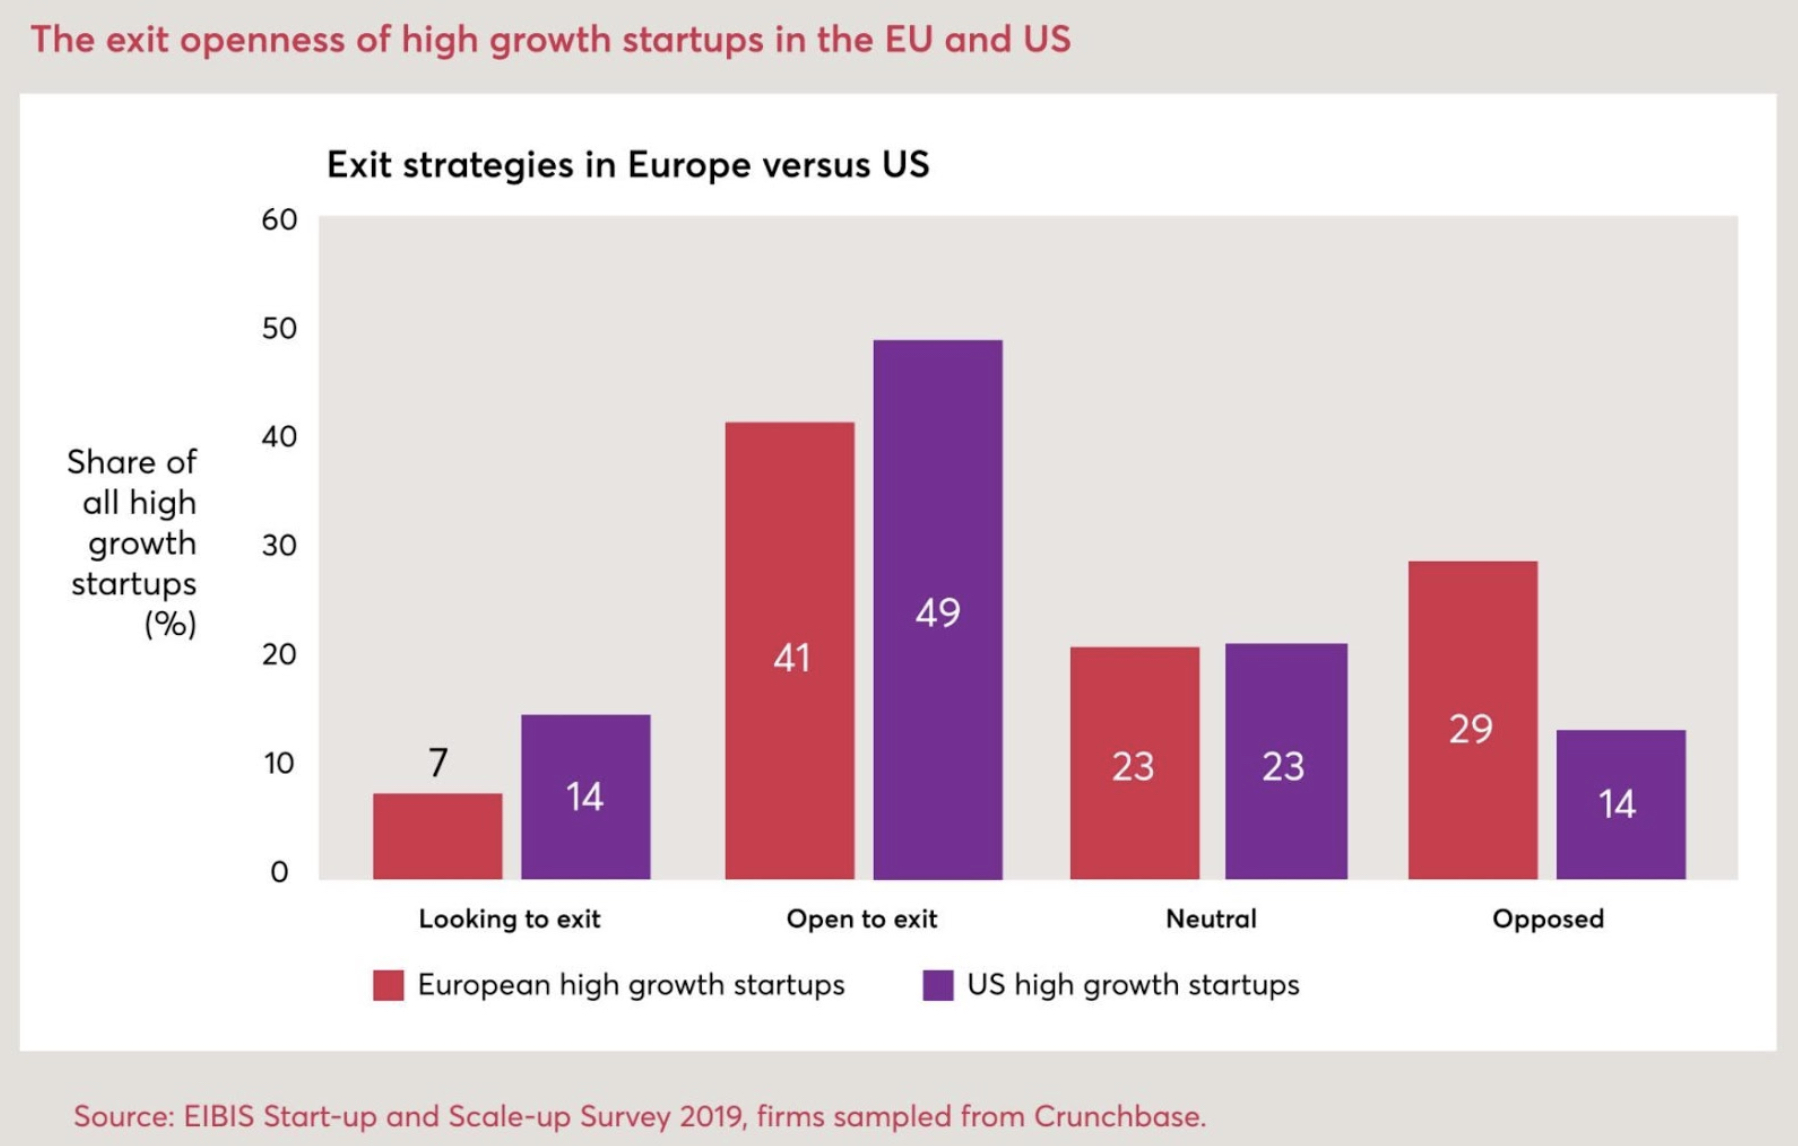 EIB: The exit openness of high growth startups in the EU and US